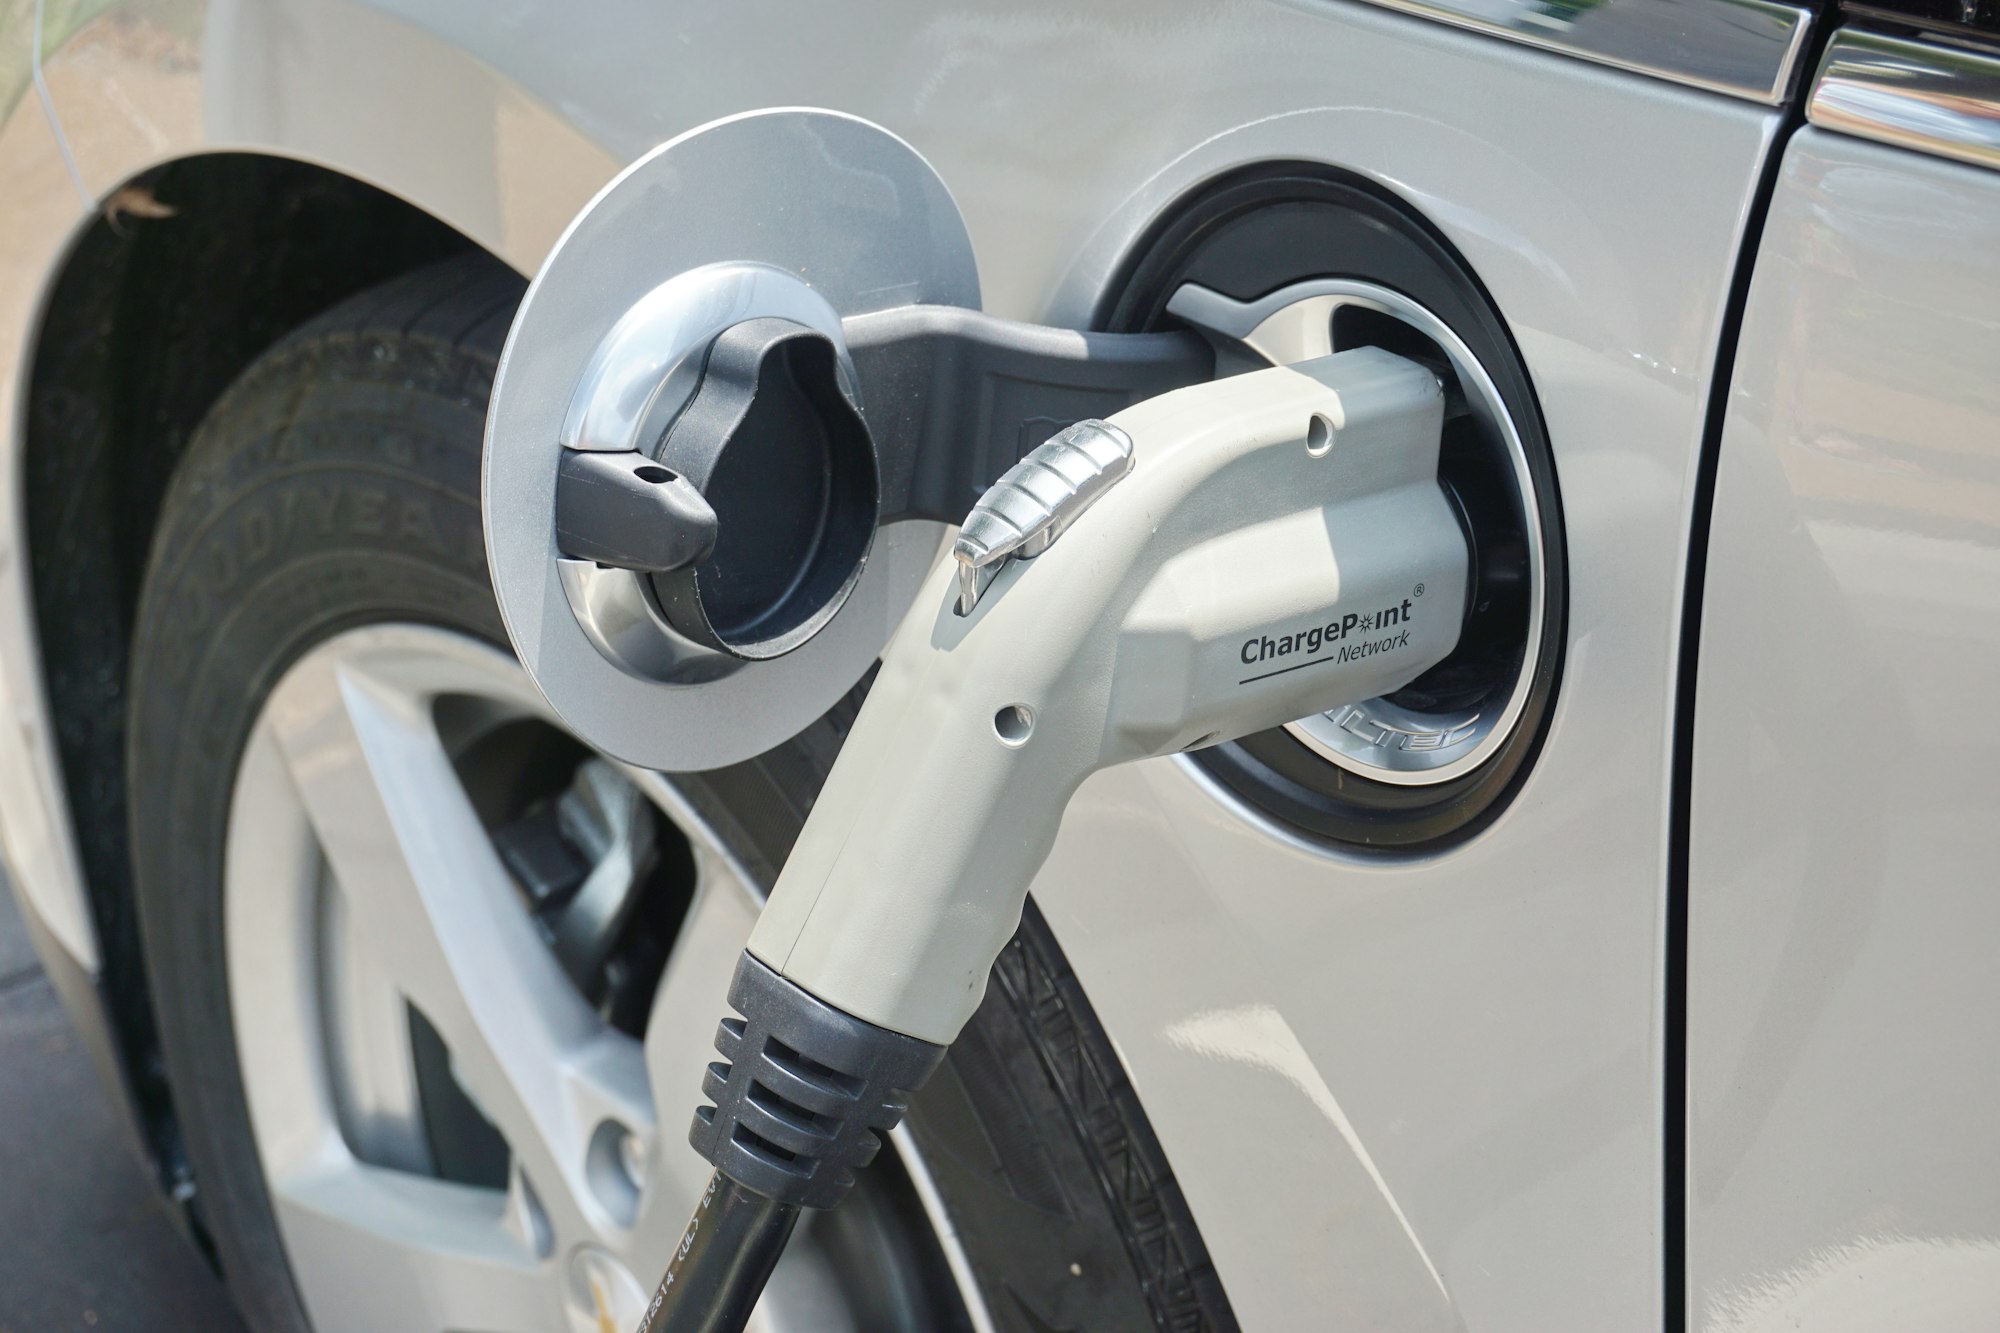 Japan's Nidec to build $715M plant in Mexico to tap EV demand